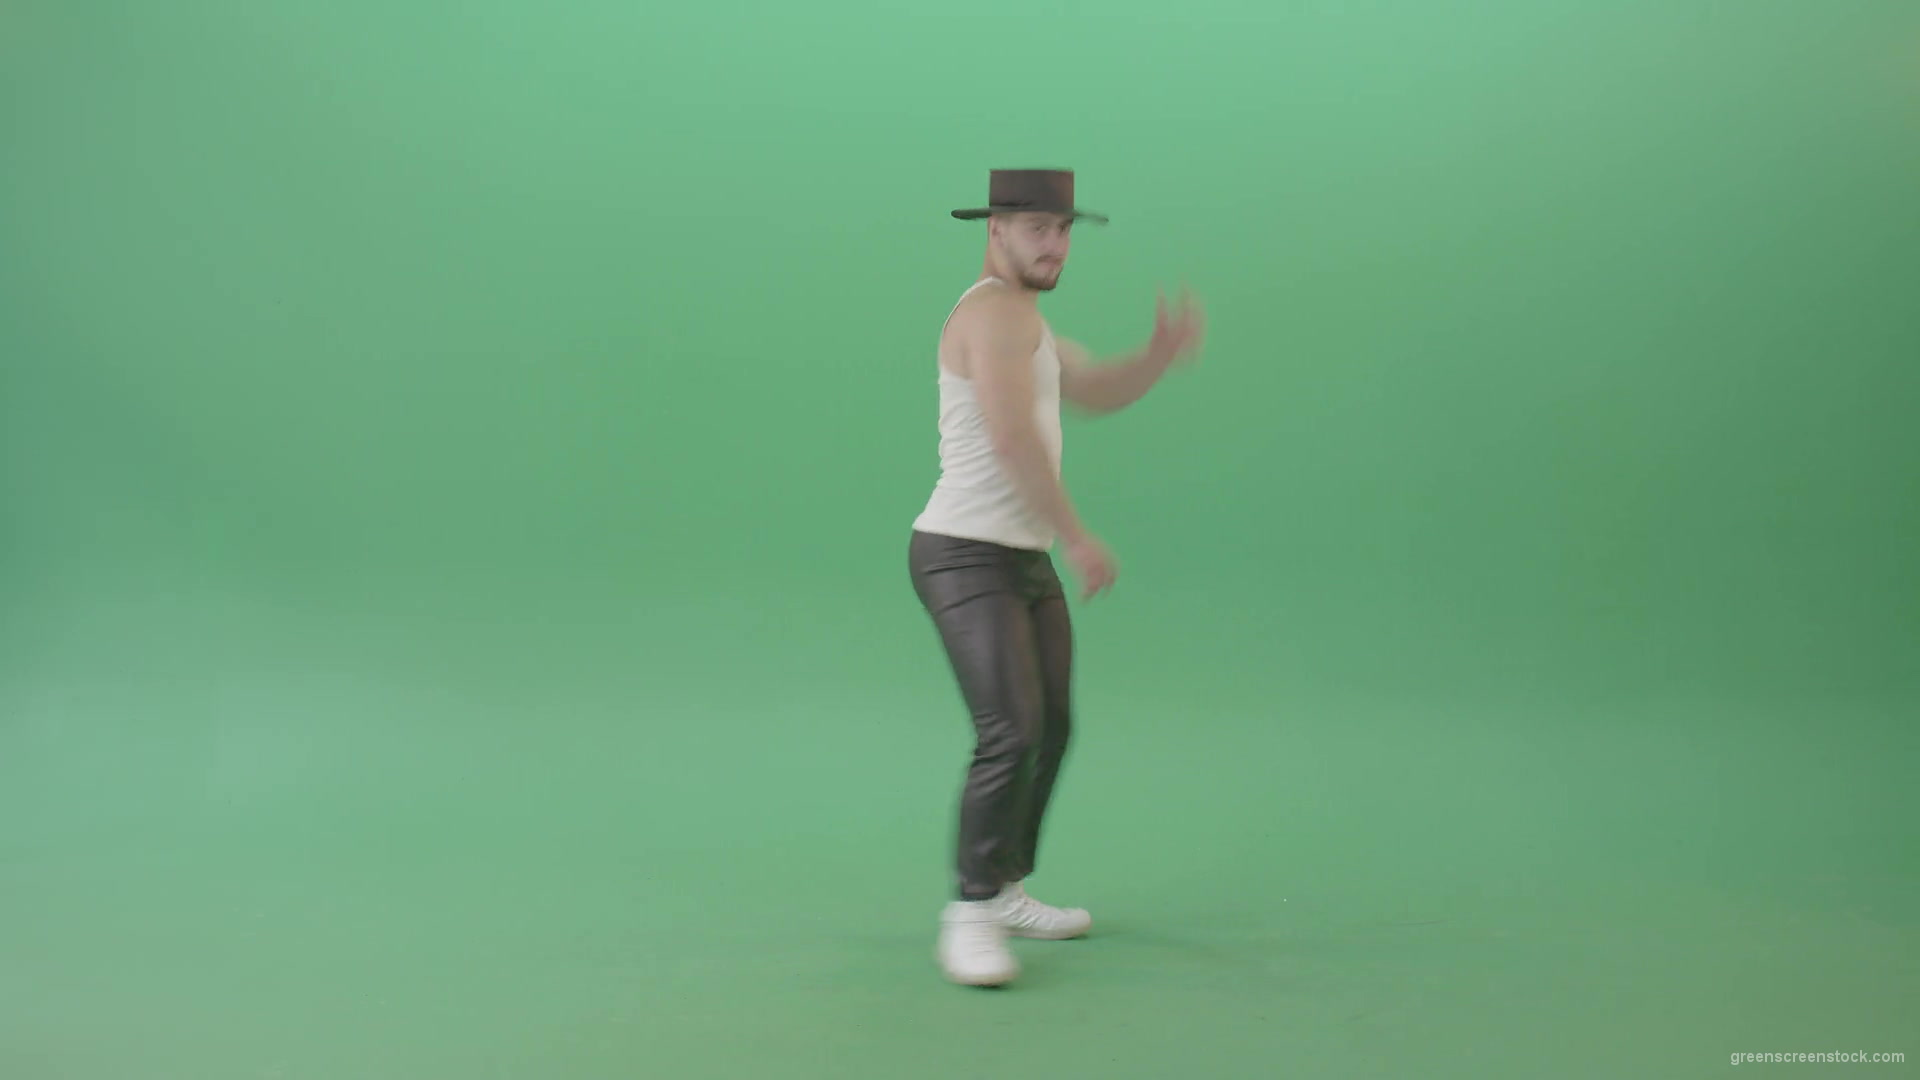 Michael-Jackson-Turn-spinning-and-dance-by-funny-man-isolated-on-Green-Screen-4K-Video-Footage-1920_005 Green Screen Stock